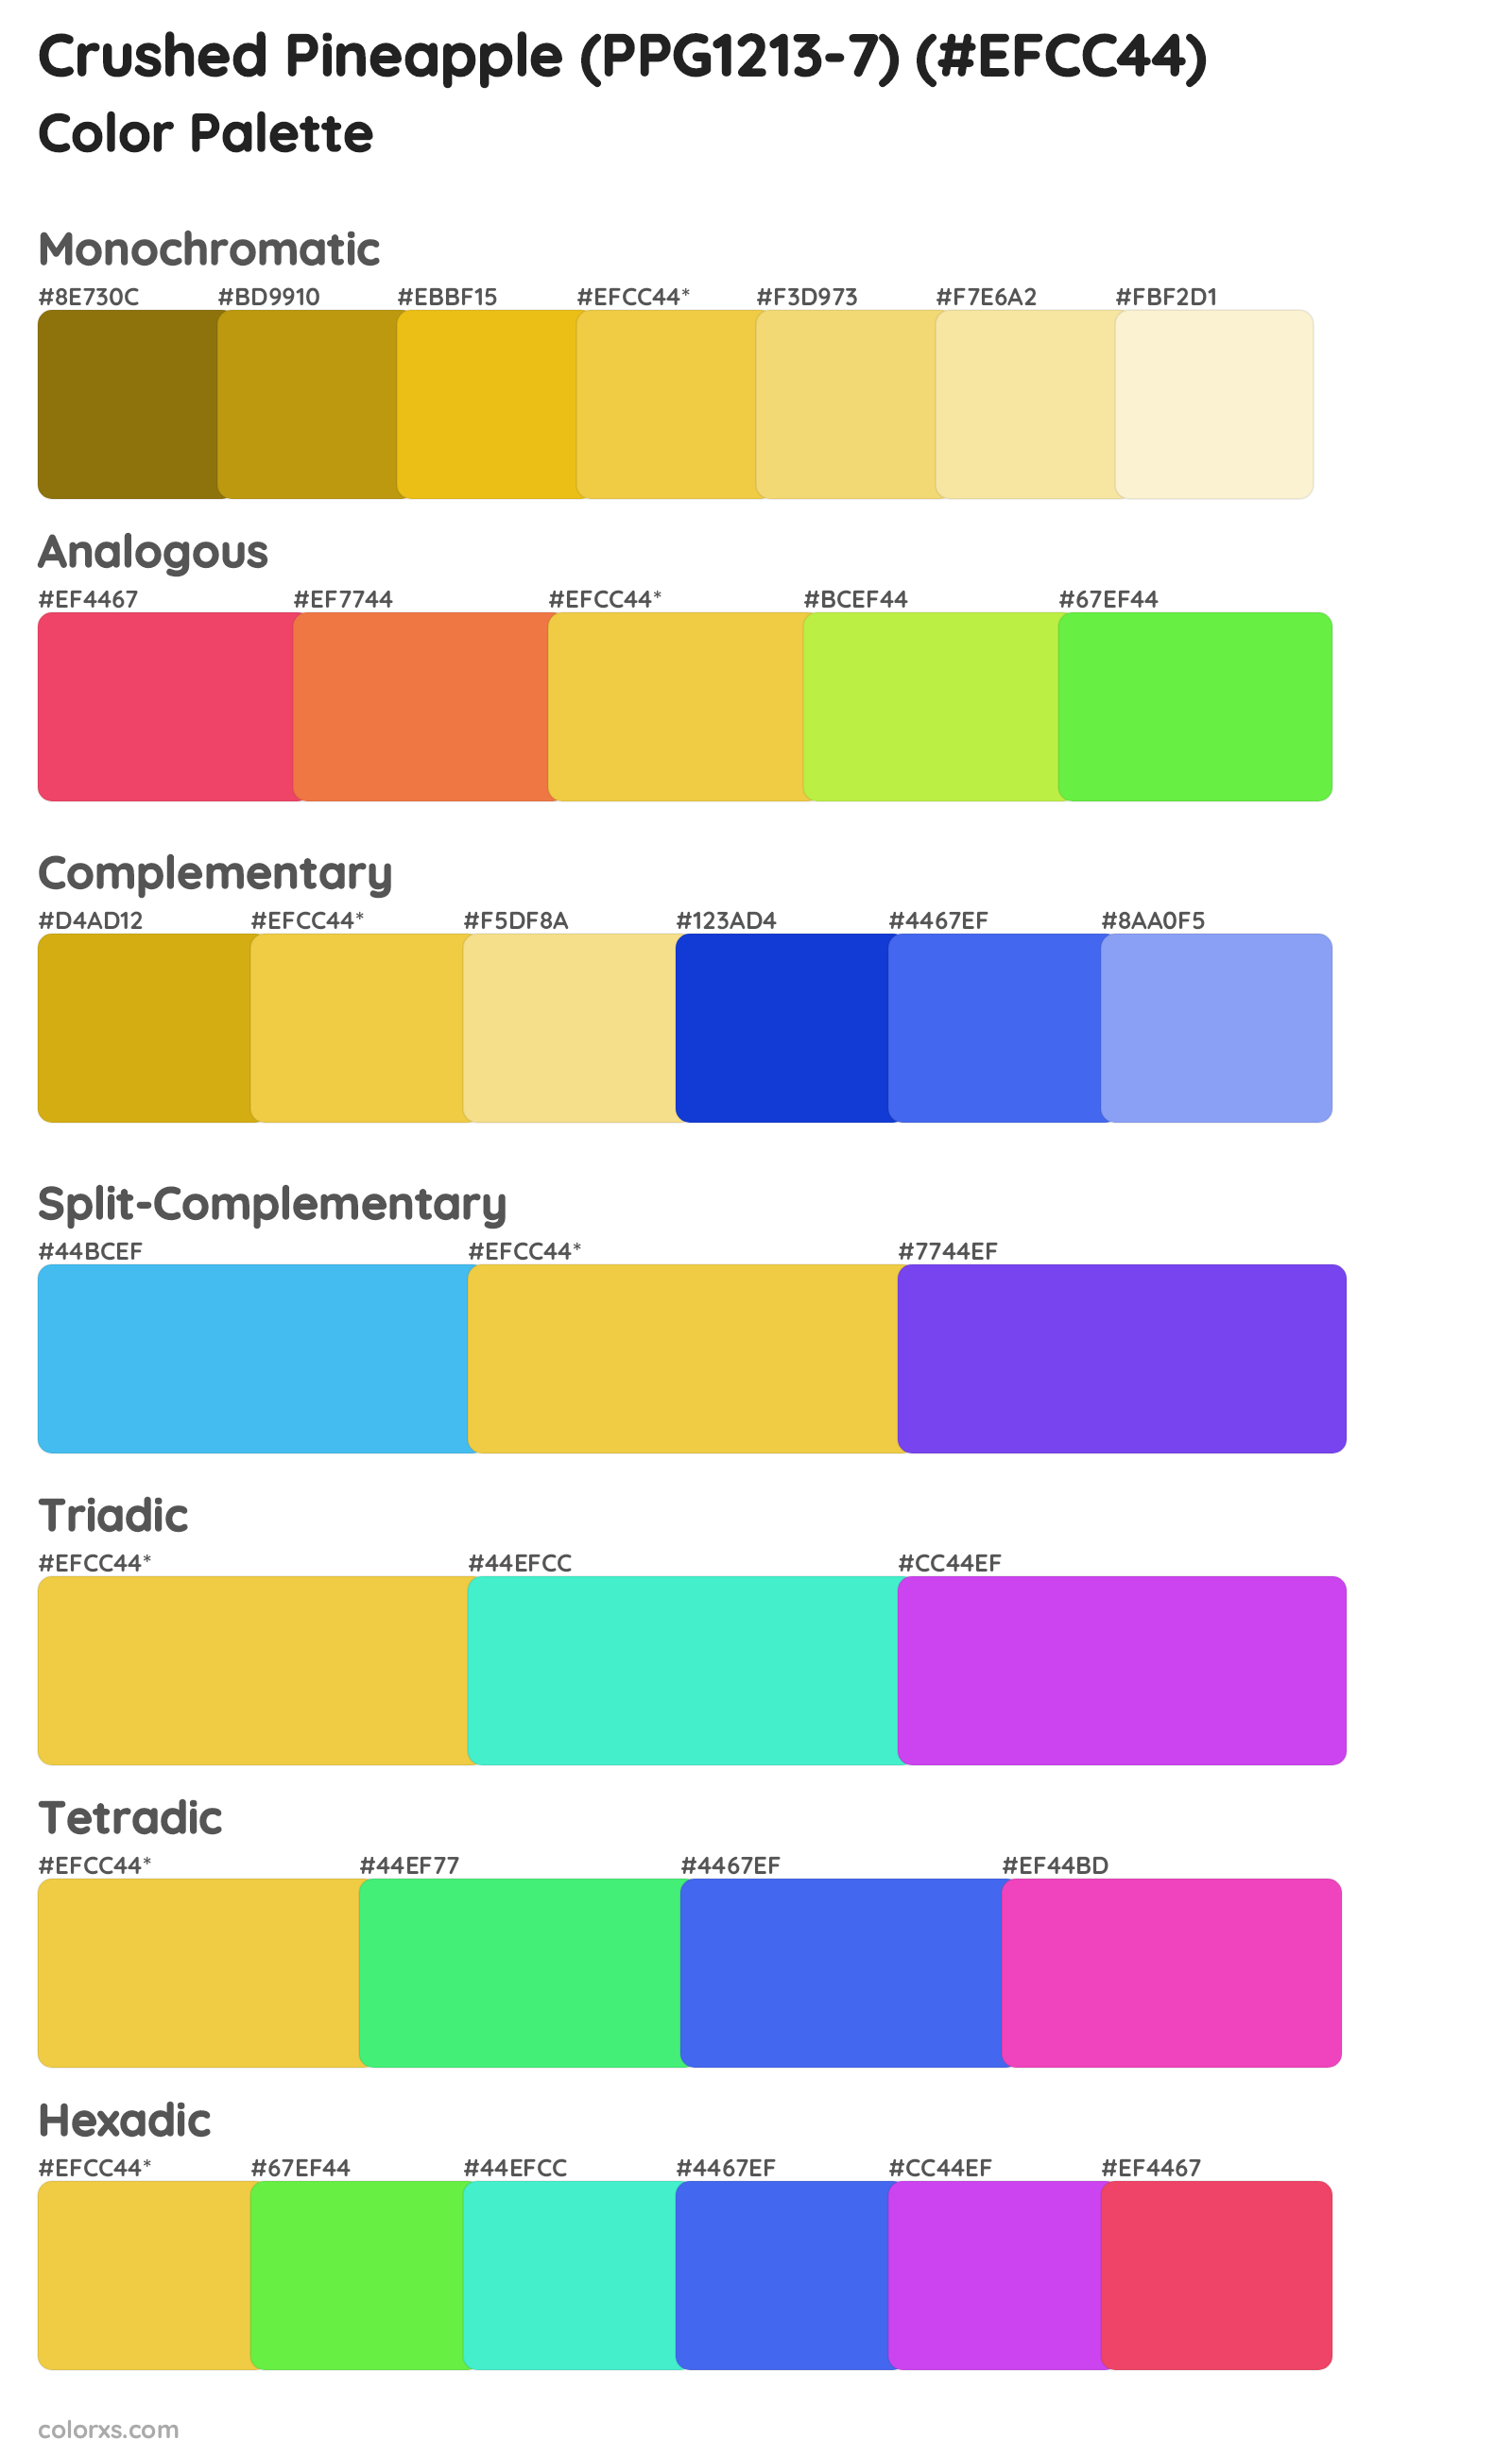 Crushed Pineapple (PPG1213-7) Color Scheme Palettes